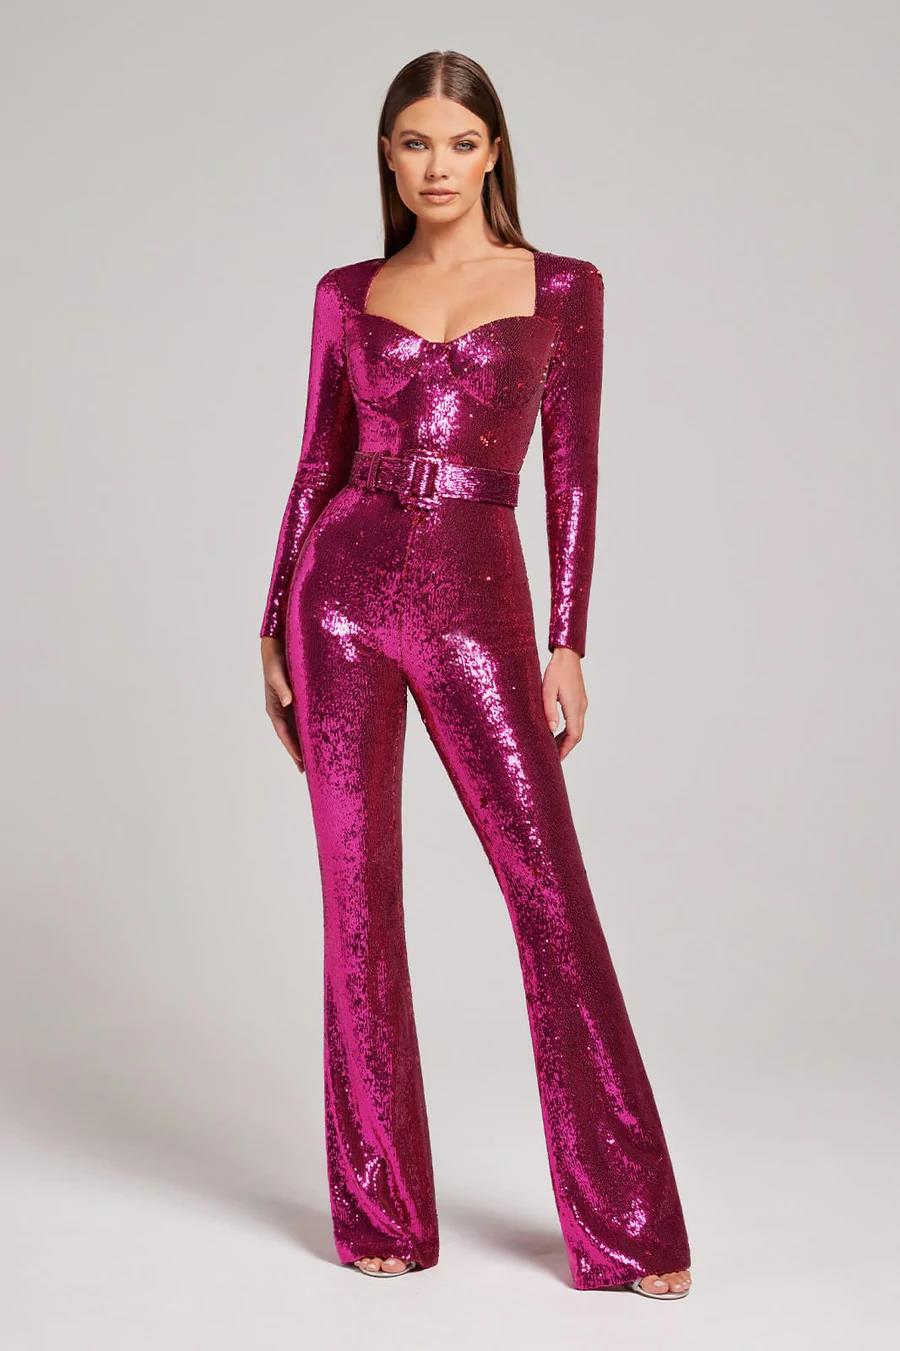 An eye-catching jumpsuit, designed to capture attention with its striking style and one-piece design.